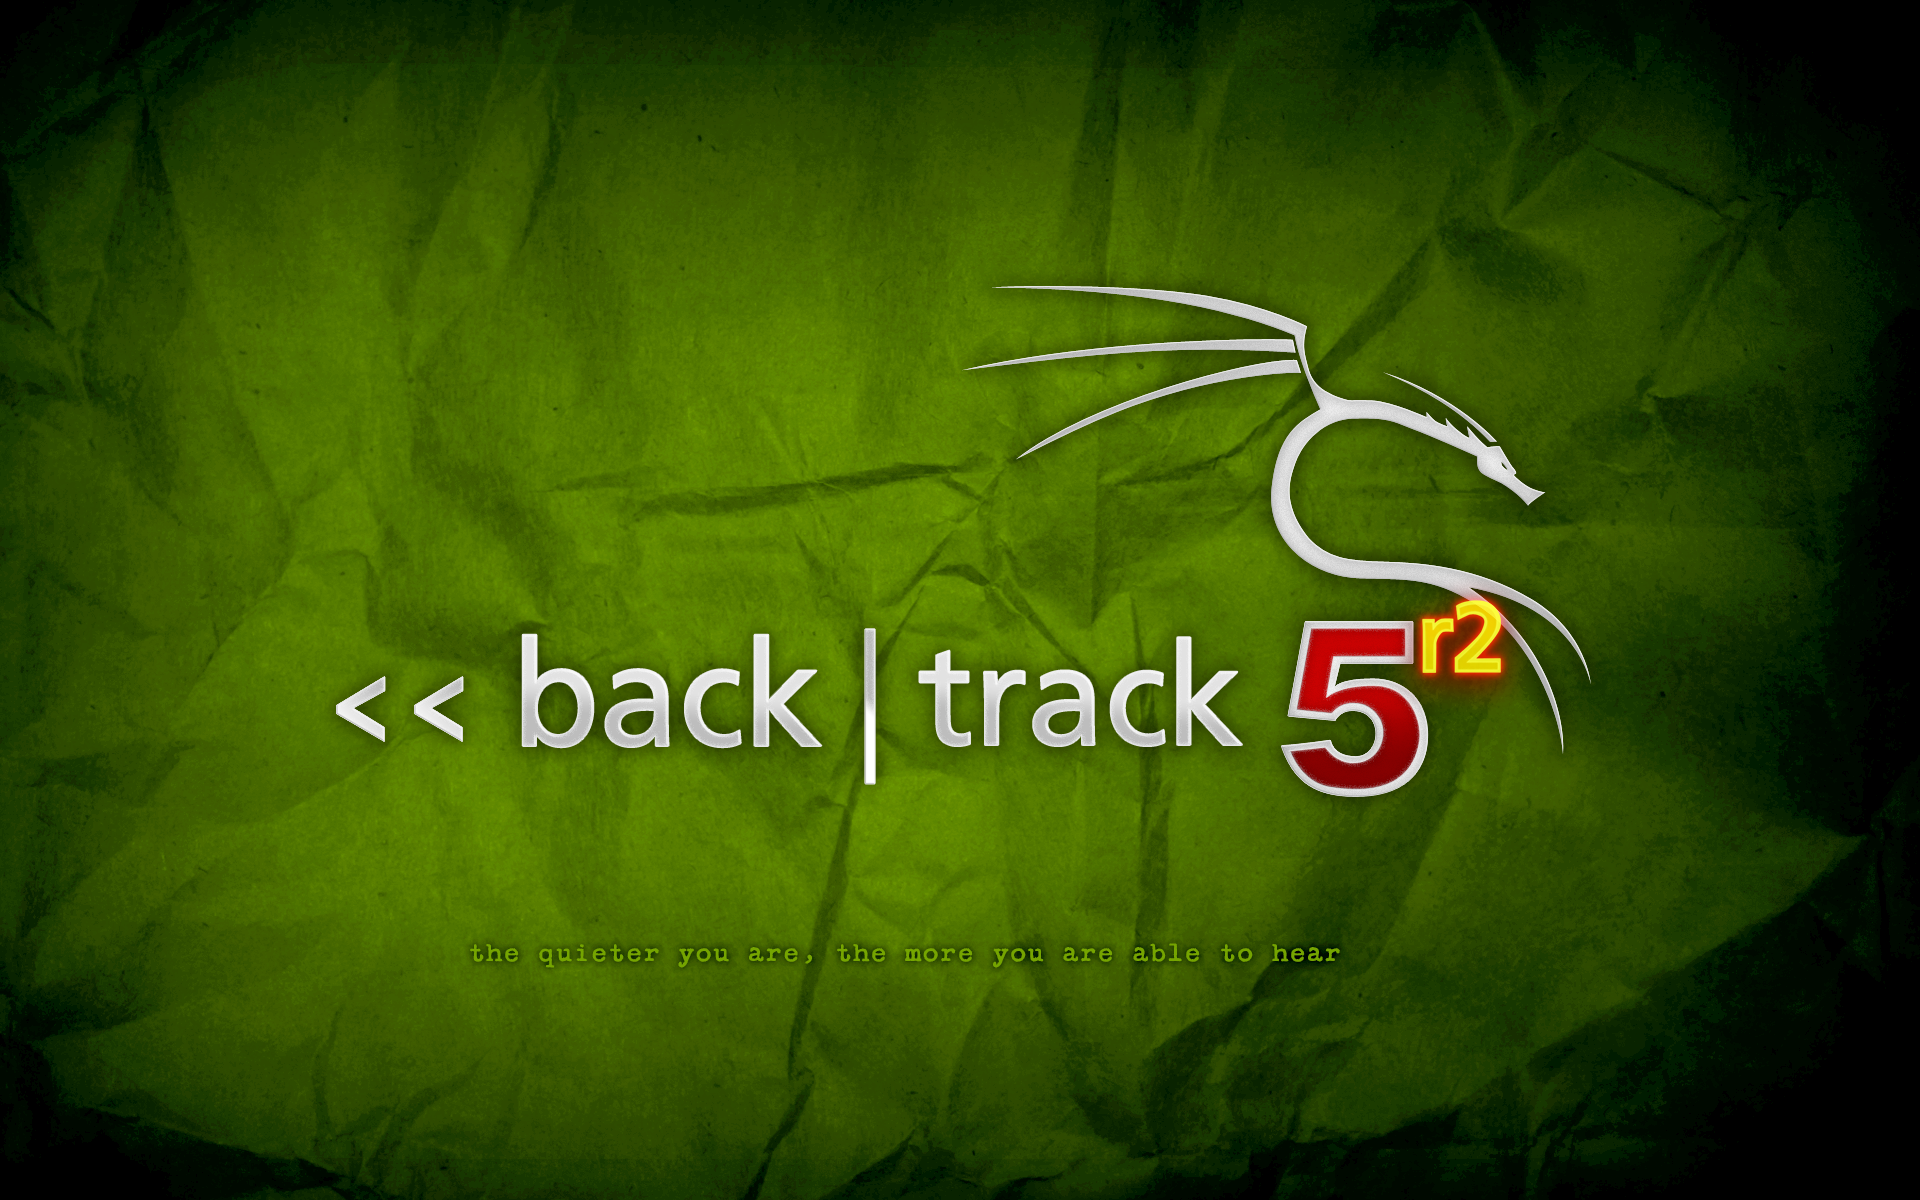 backtrack-5r2-lime.png